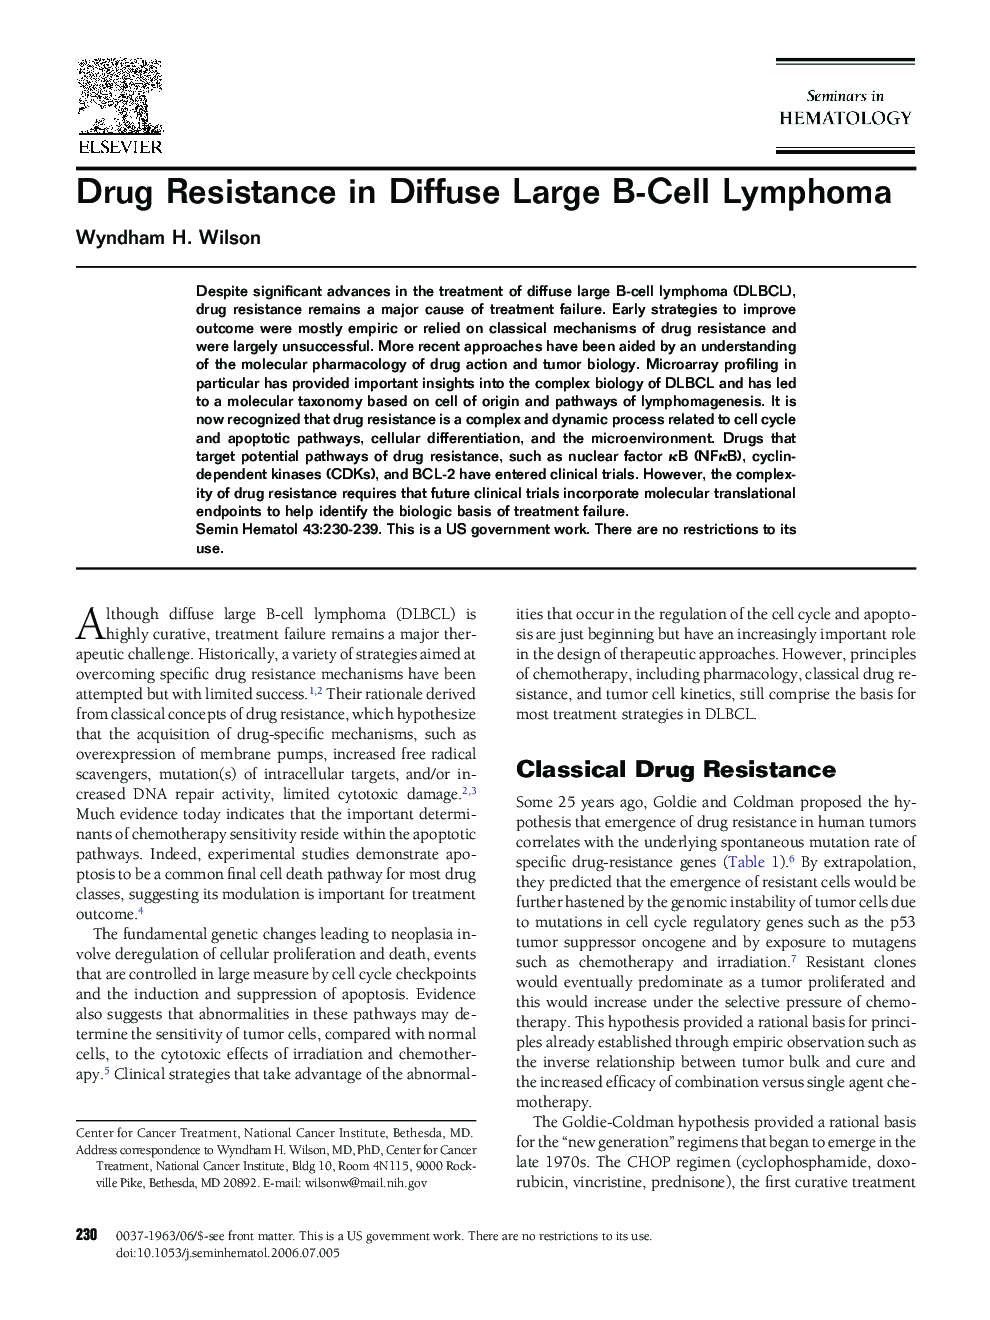 Drug Resistance in Diffuse Large B-Cell Lymphoma